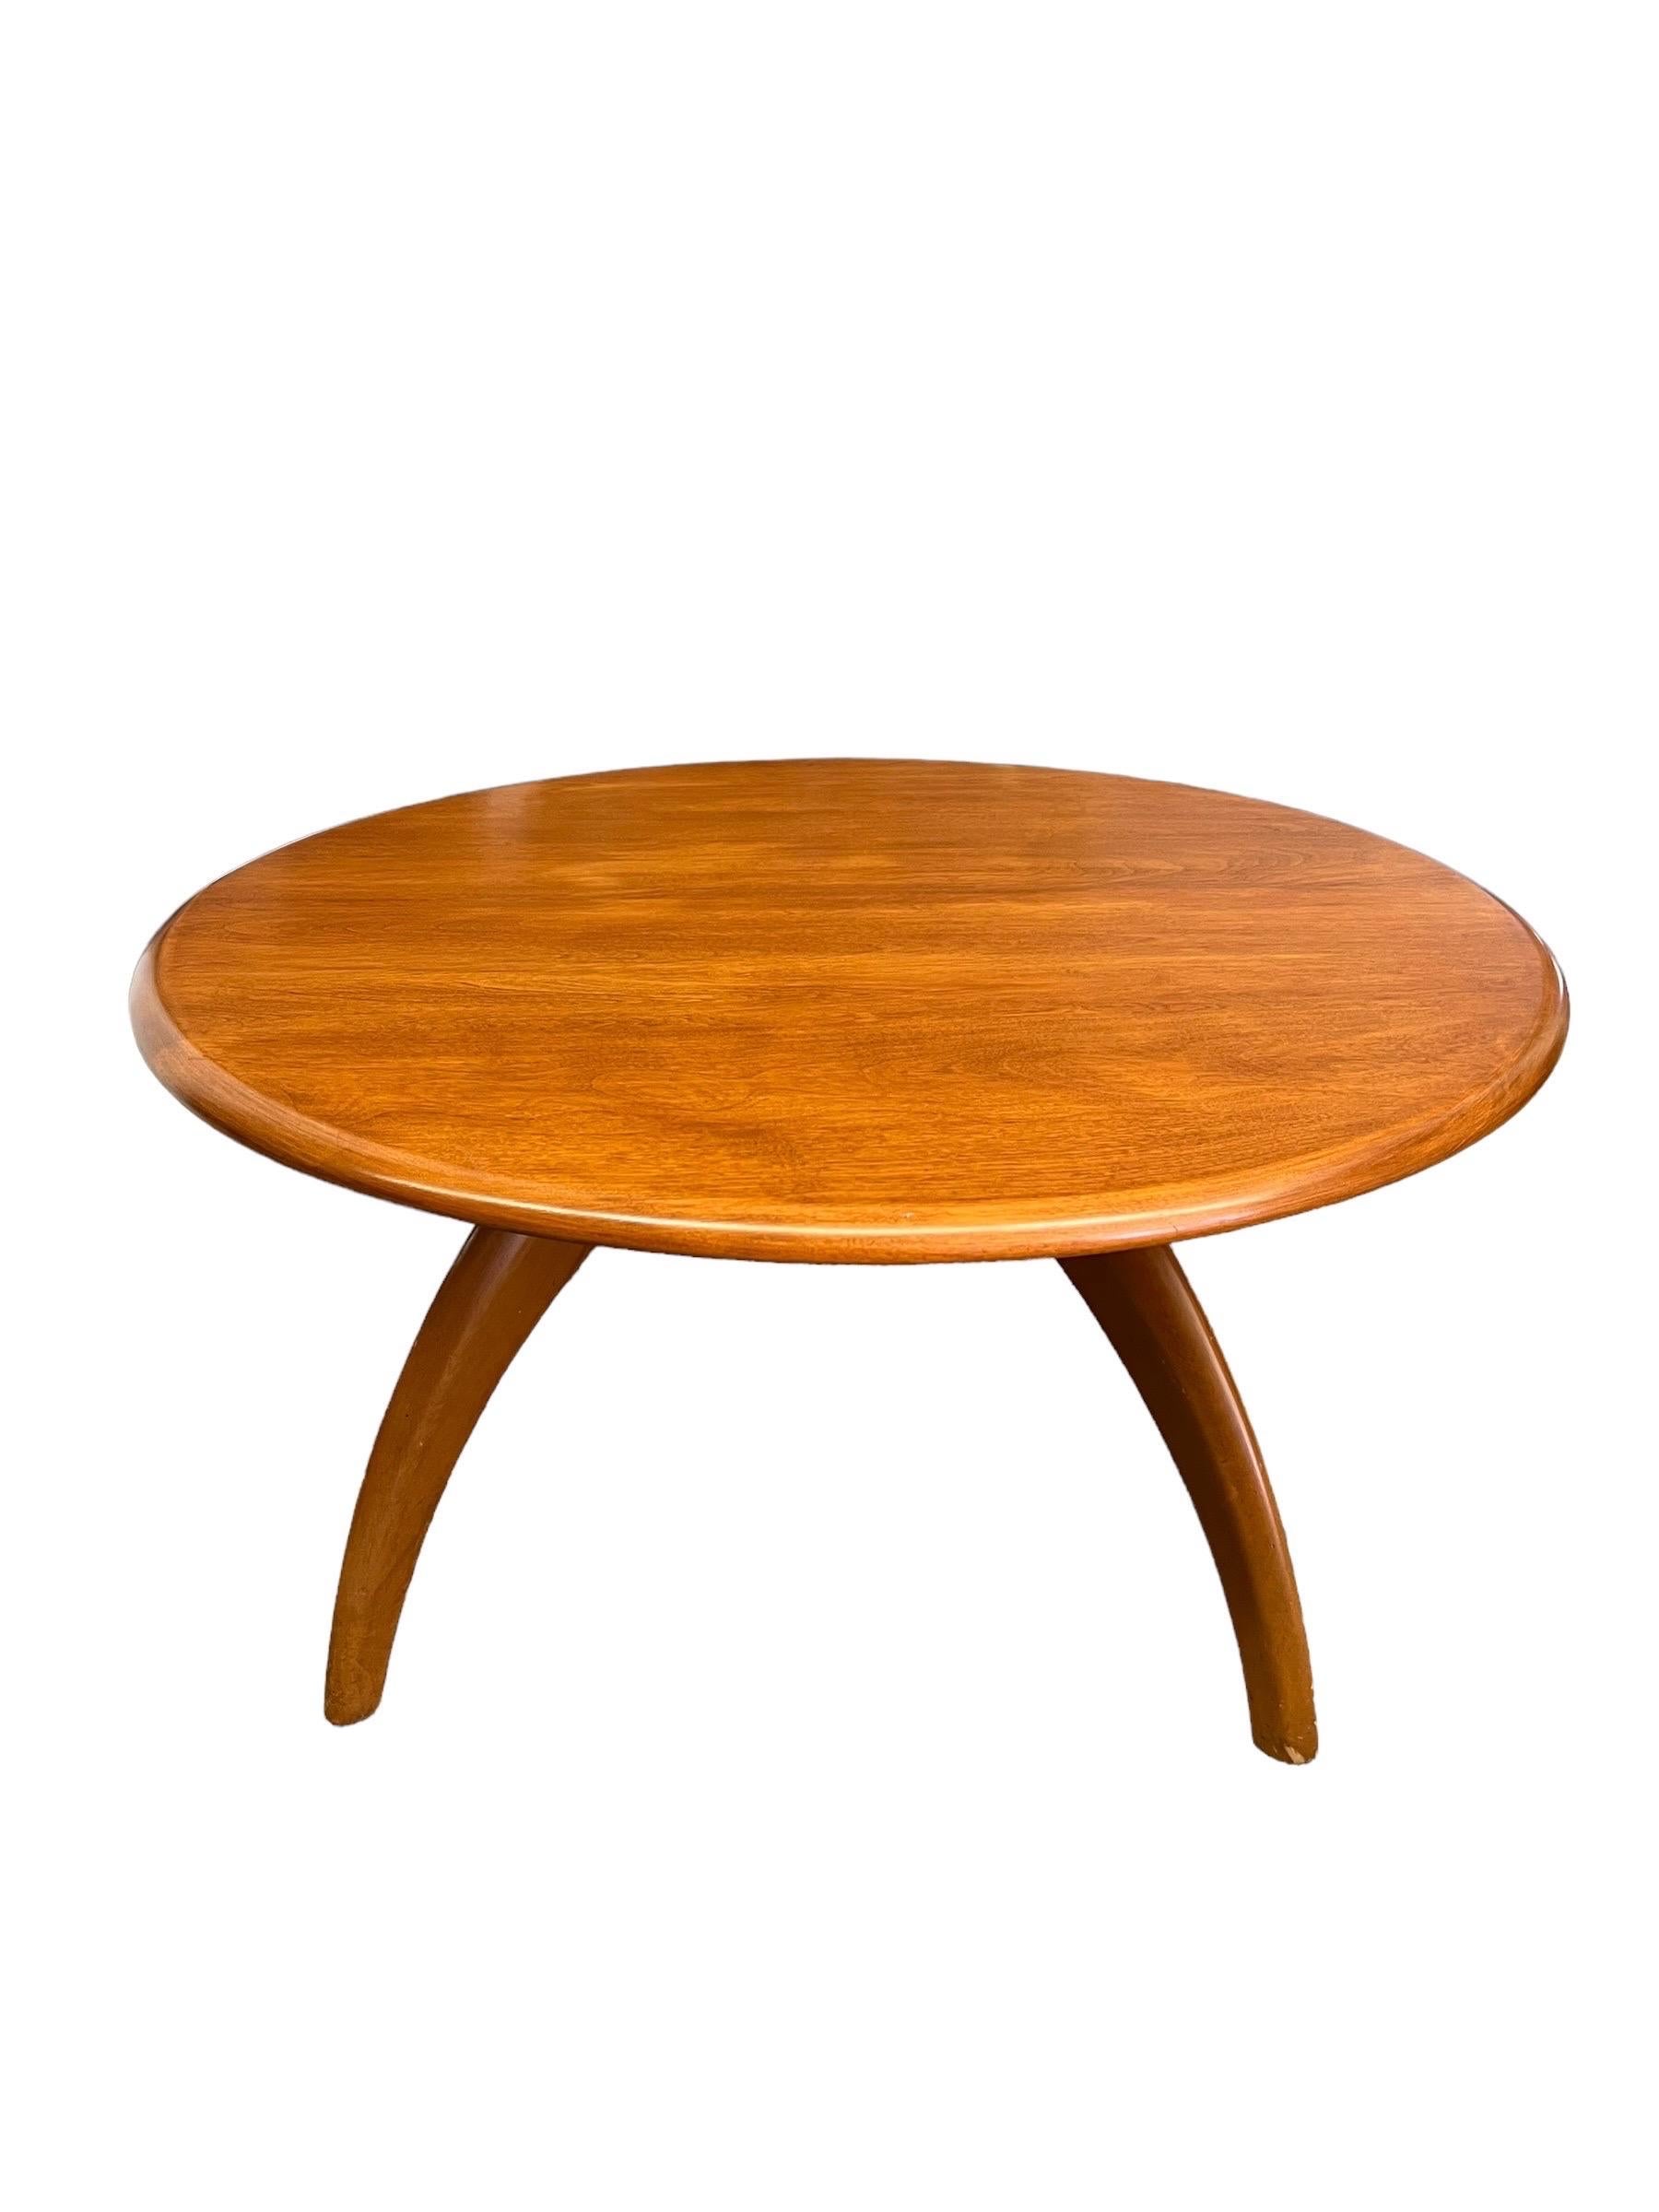 This mid century modern coffee table by Heywood Wakefield features hardwood construction, original champagne finish, swivel top (lazy Susan style), and tall tapered legs.

Dimensions: 32 Diameter 15H